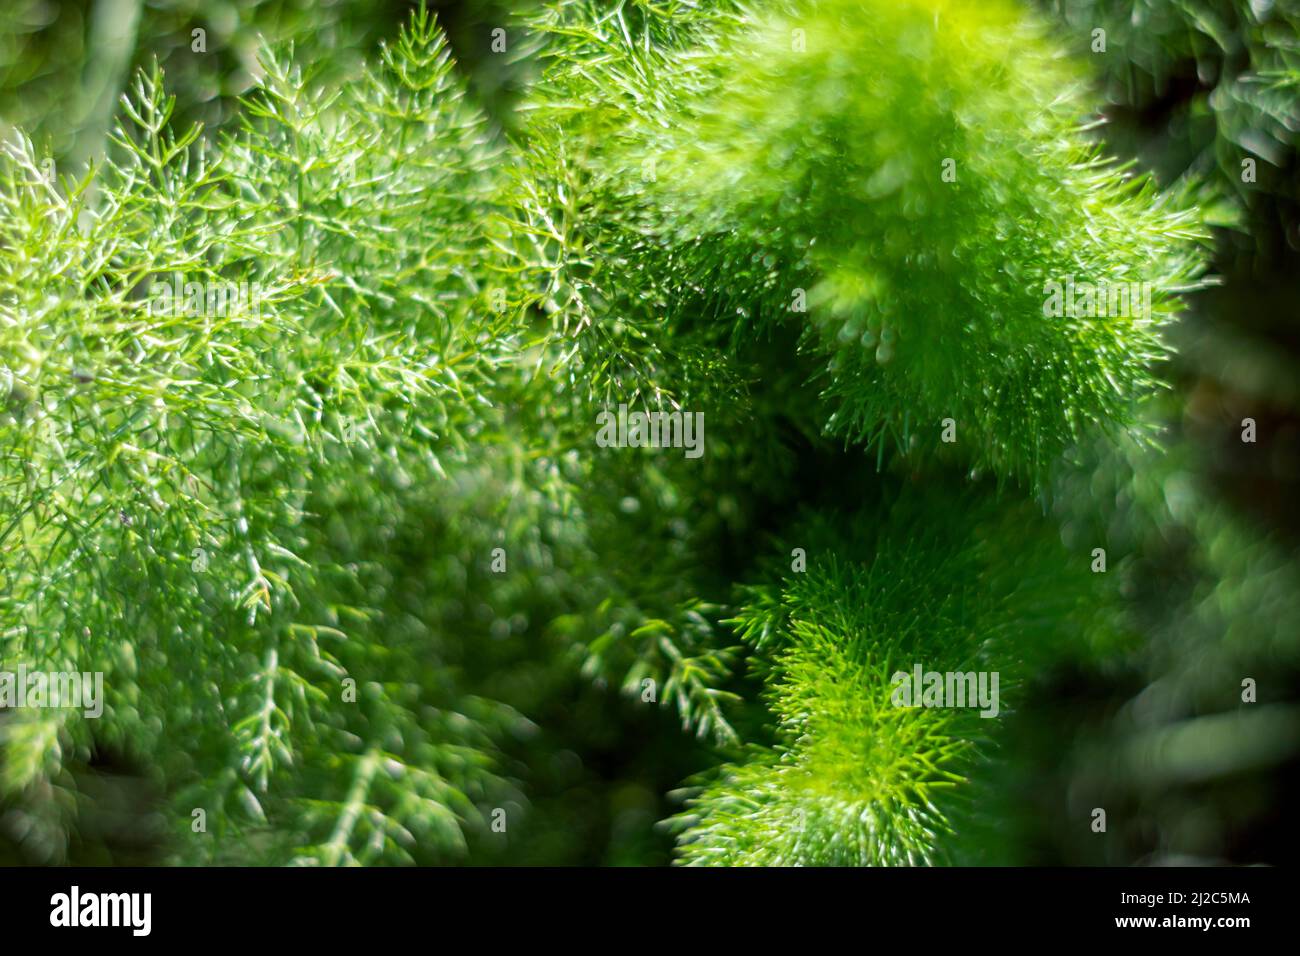 Fennel plant extremely aromatic with medicinal properties, plants used to make infusions or for cooking purposes. Intense odor if fennel. Fennel Foeniculum vulgare Stock Photo